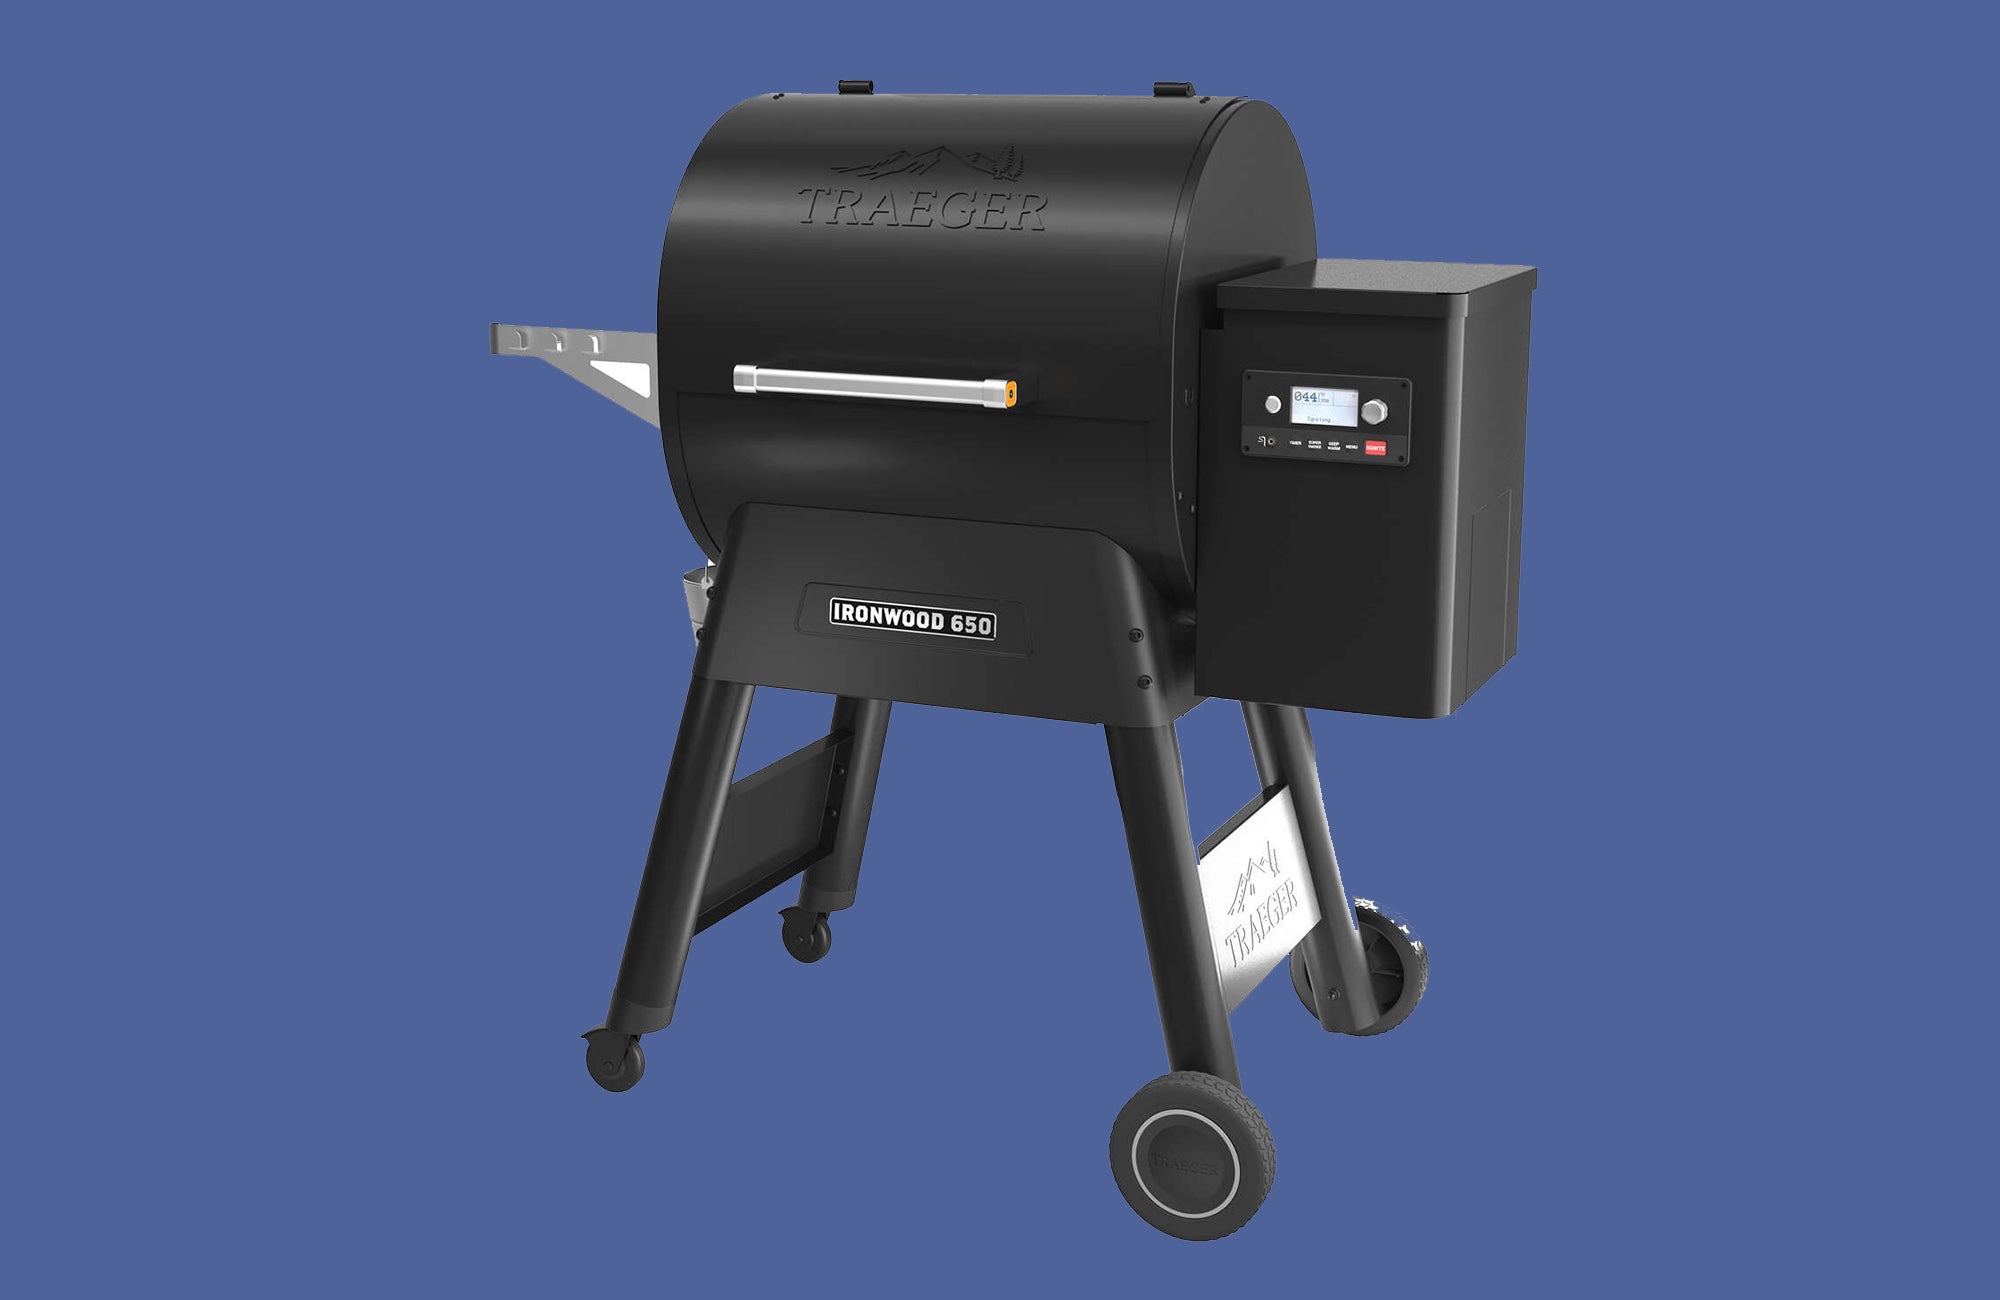 Are Traeger Grills Worth the Money? 